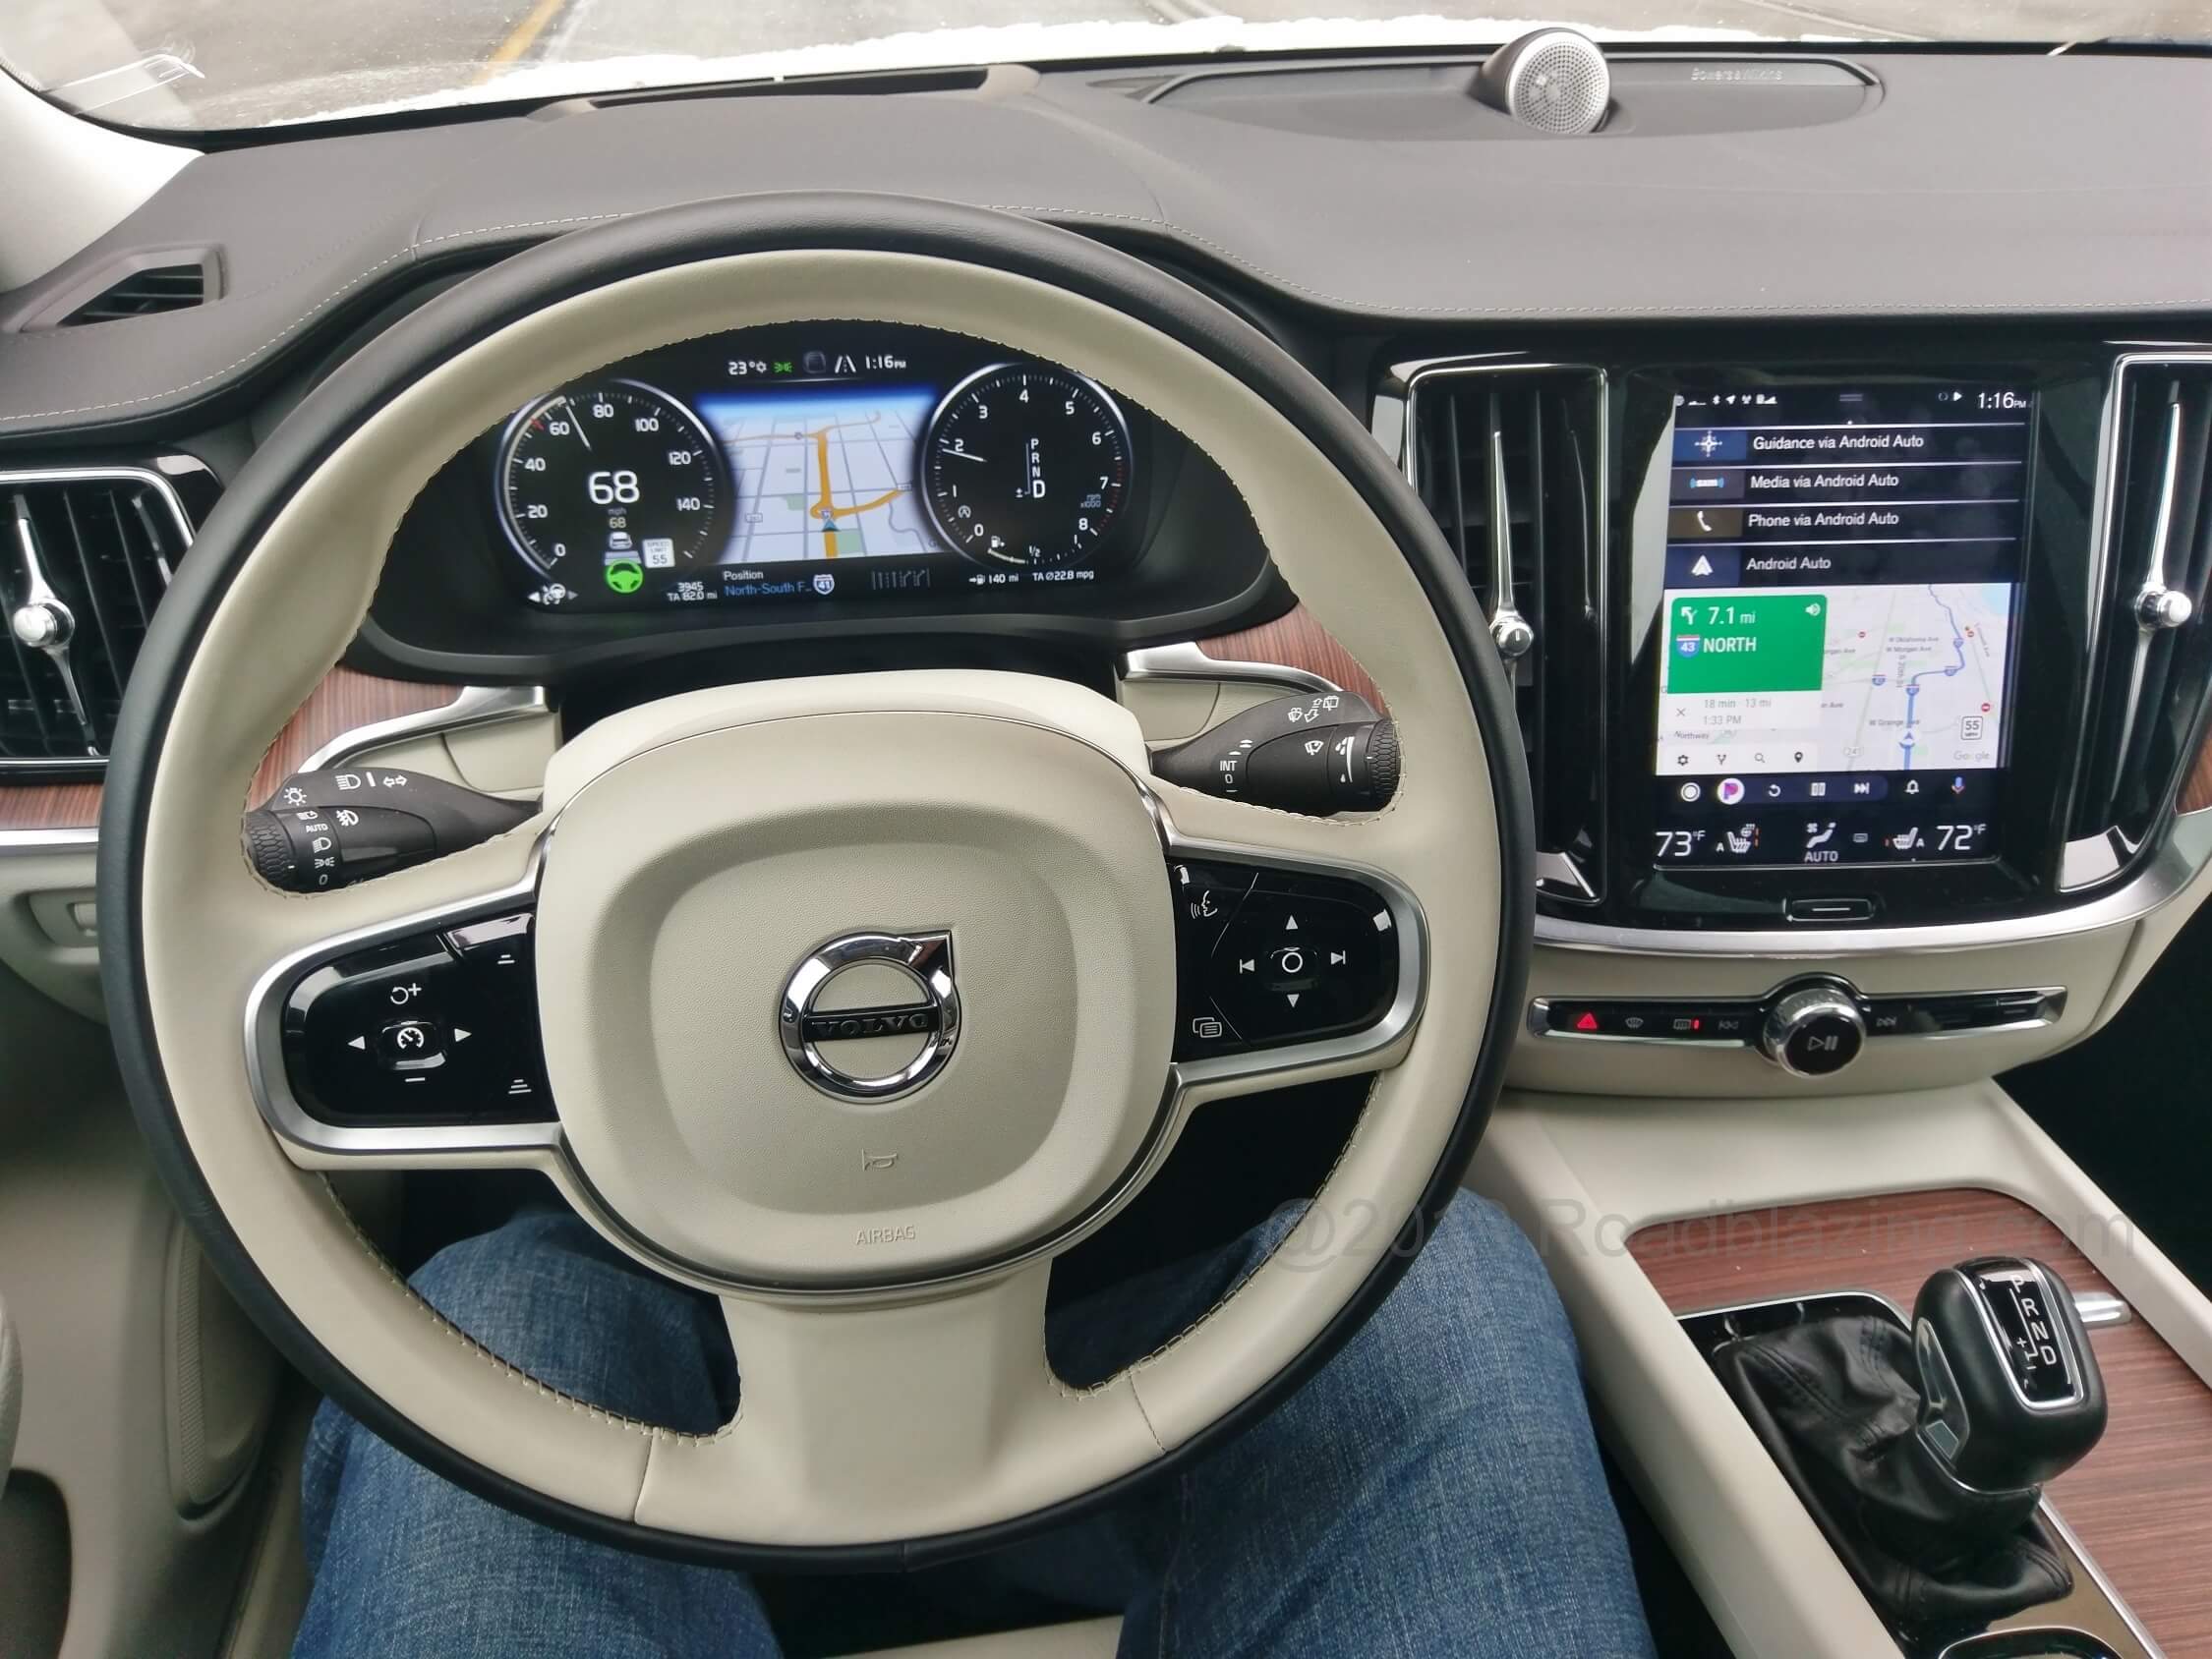 2020 Volvo V60 T5 AWD Cross Country: Sensus map displayed in virtual gauge cluster and Android Auto Google Maps shown in Sensus 9.2" media screen